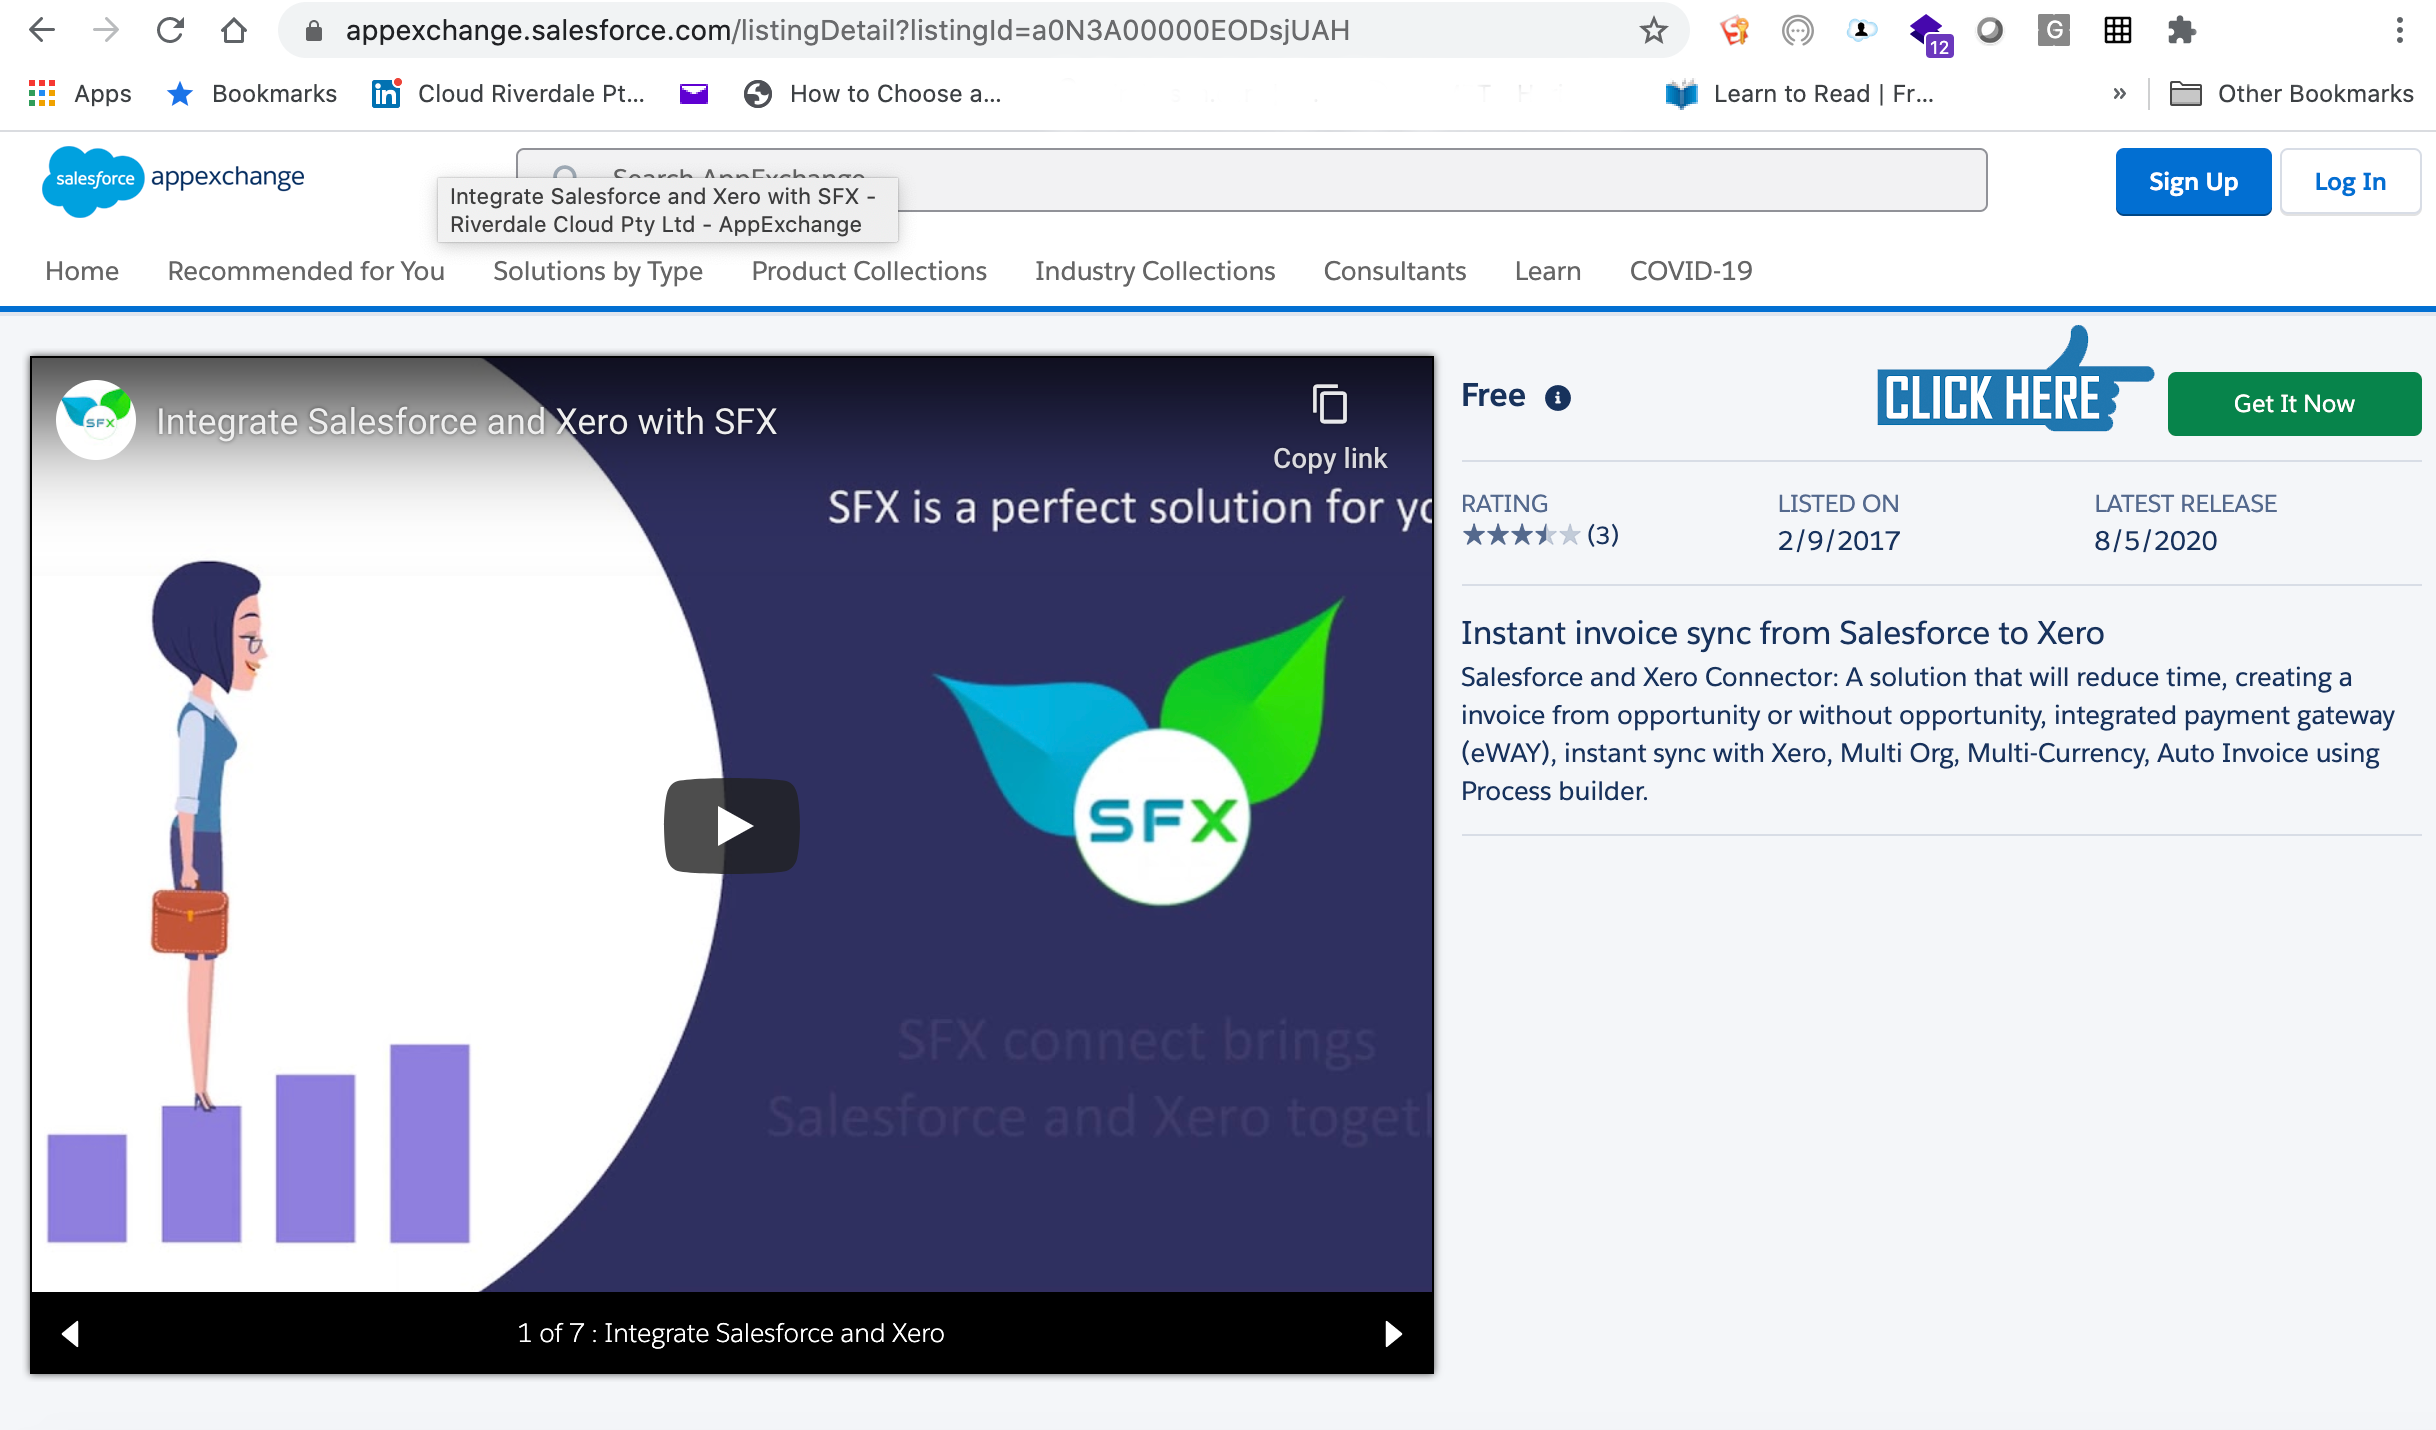 Integrate Salesforce and Xero with SFX